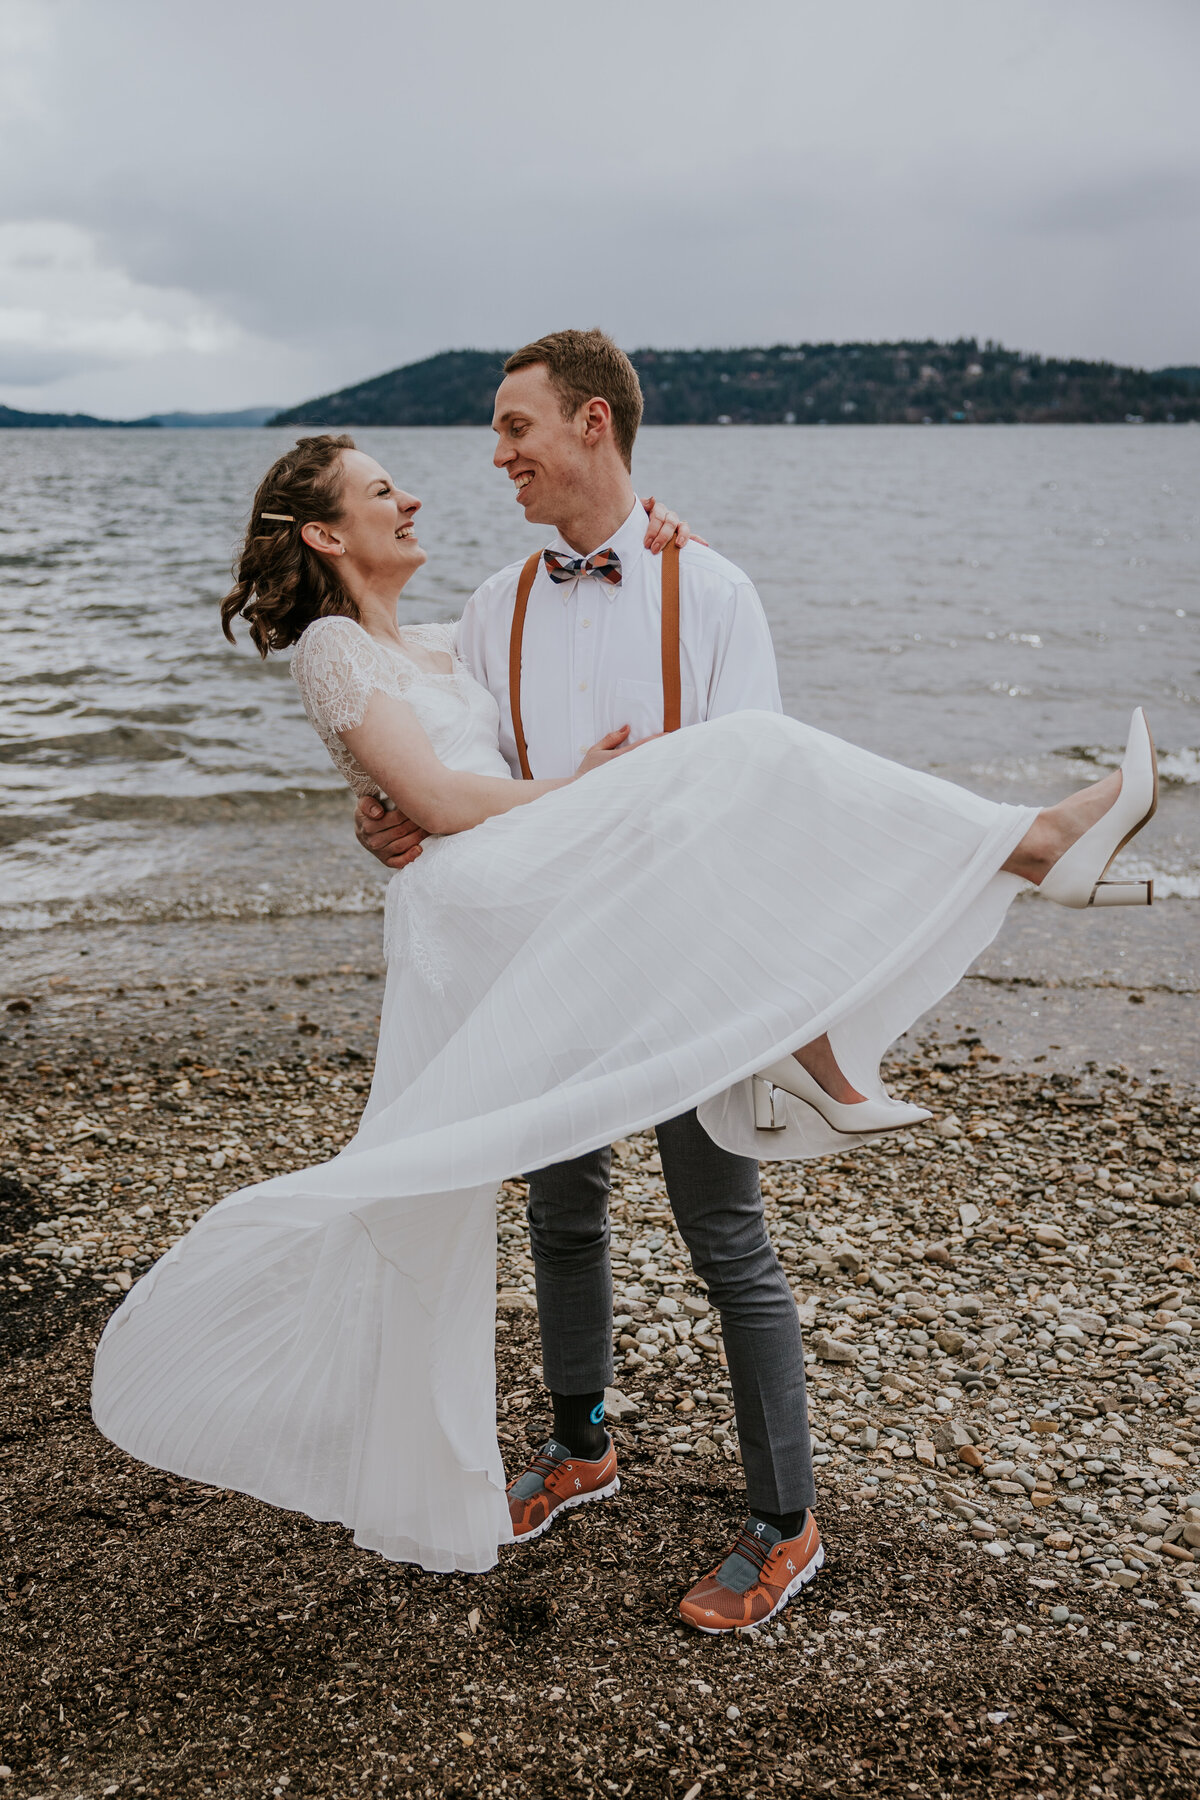 Groom holds bride while her dress blows in the wind.